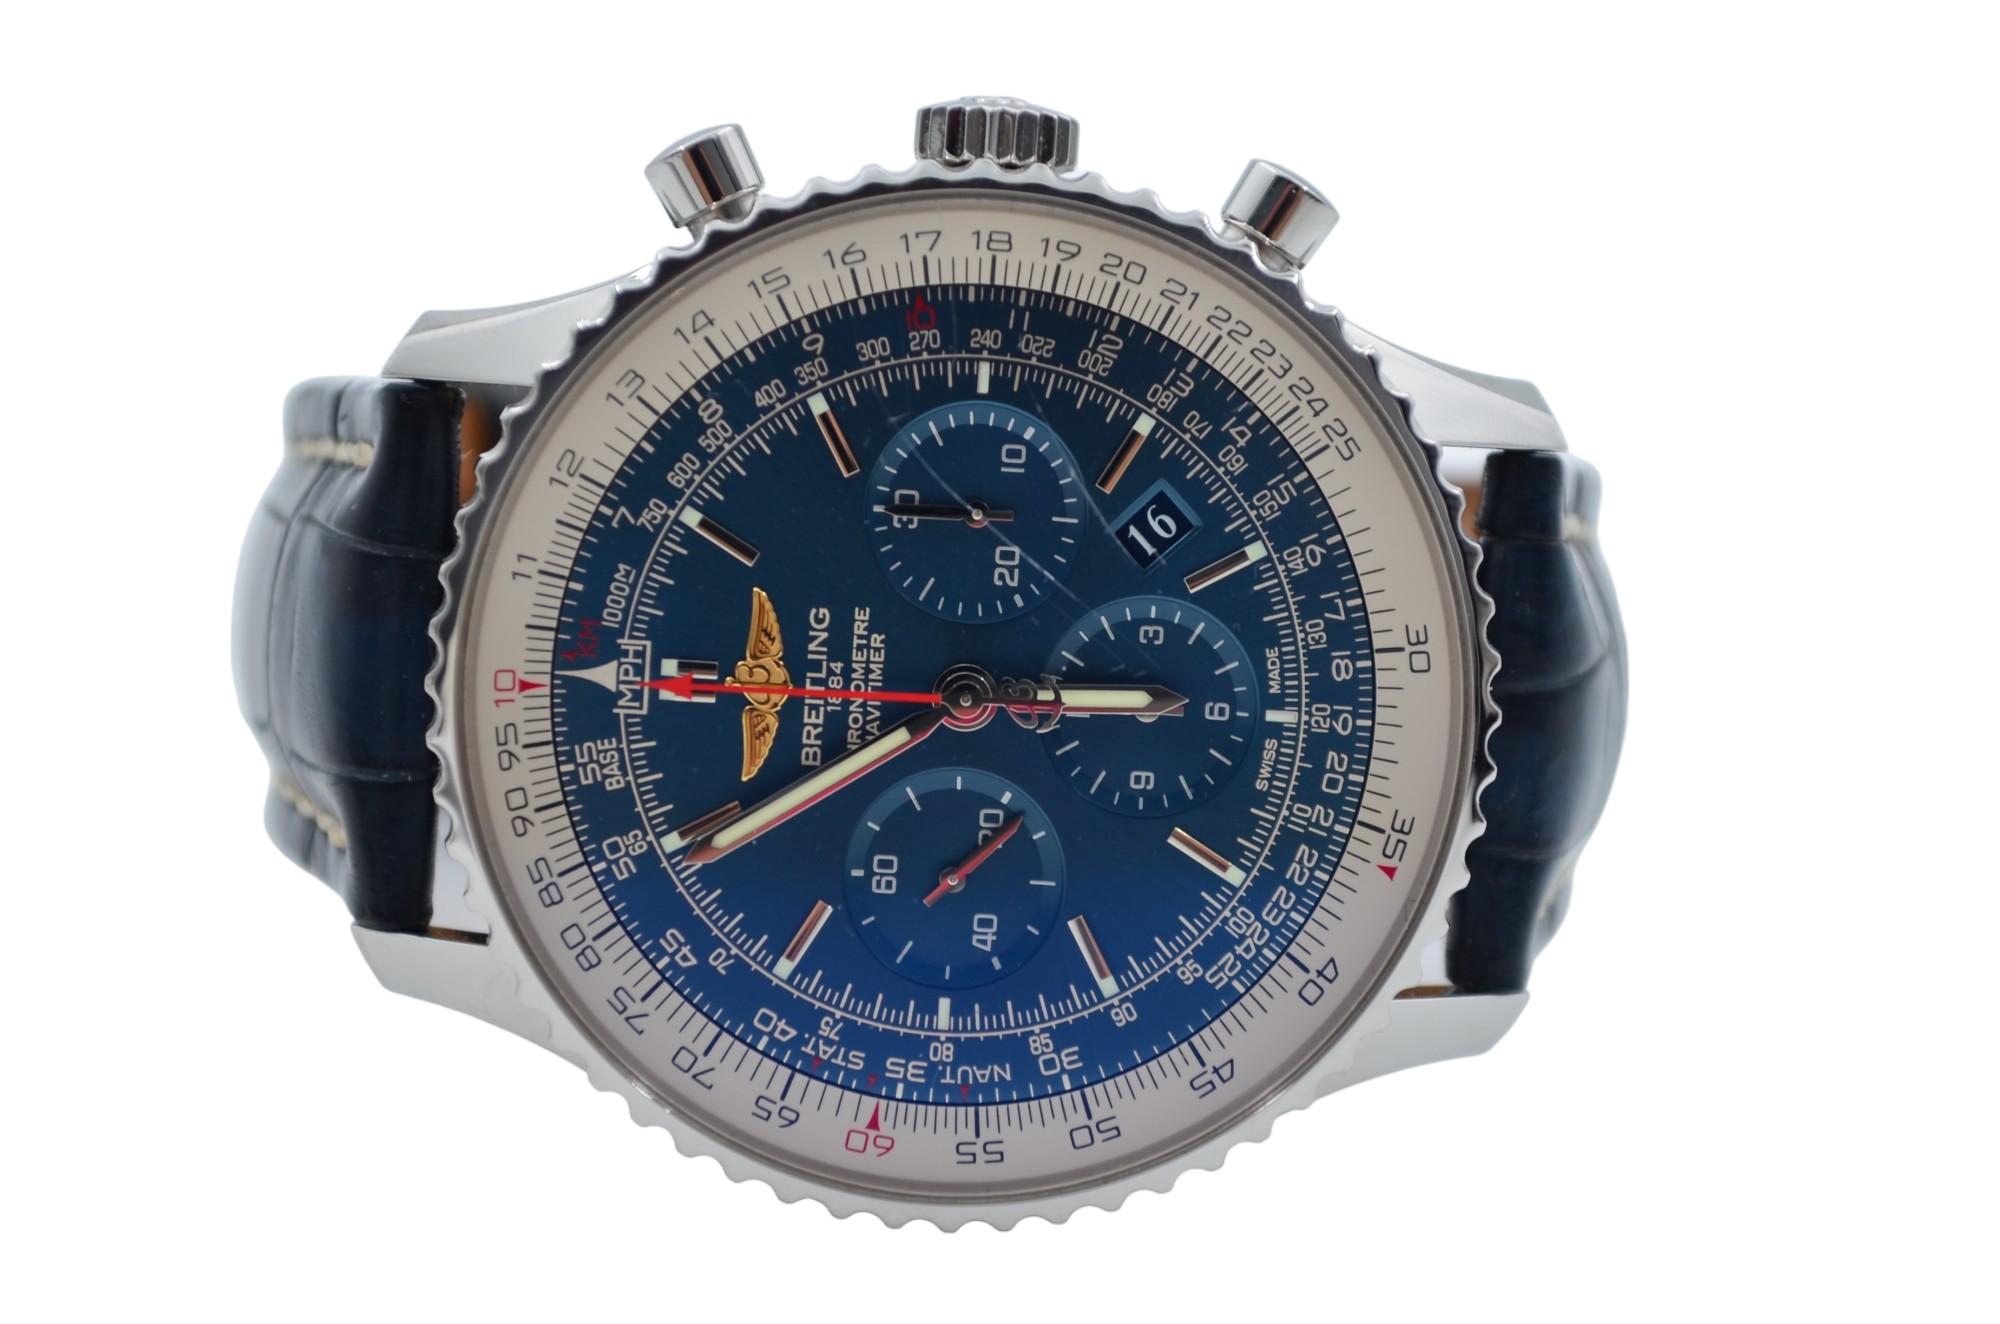 Breitling Navitimer 1 Chronograph 46mm Steel Blue Dial Leather Strap AB012721 For Sale 1